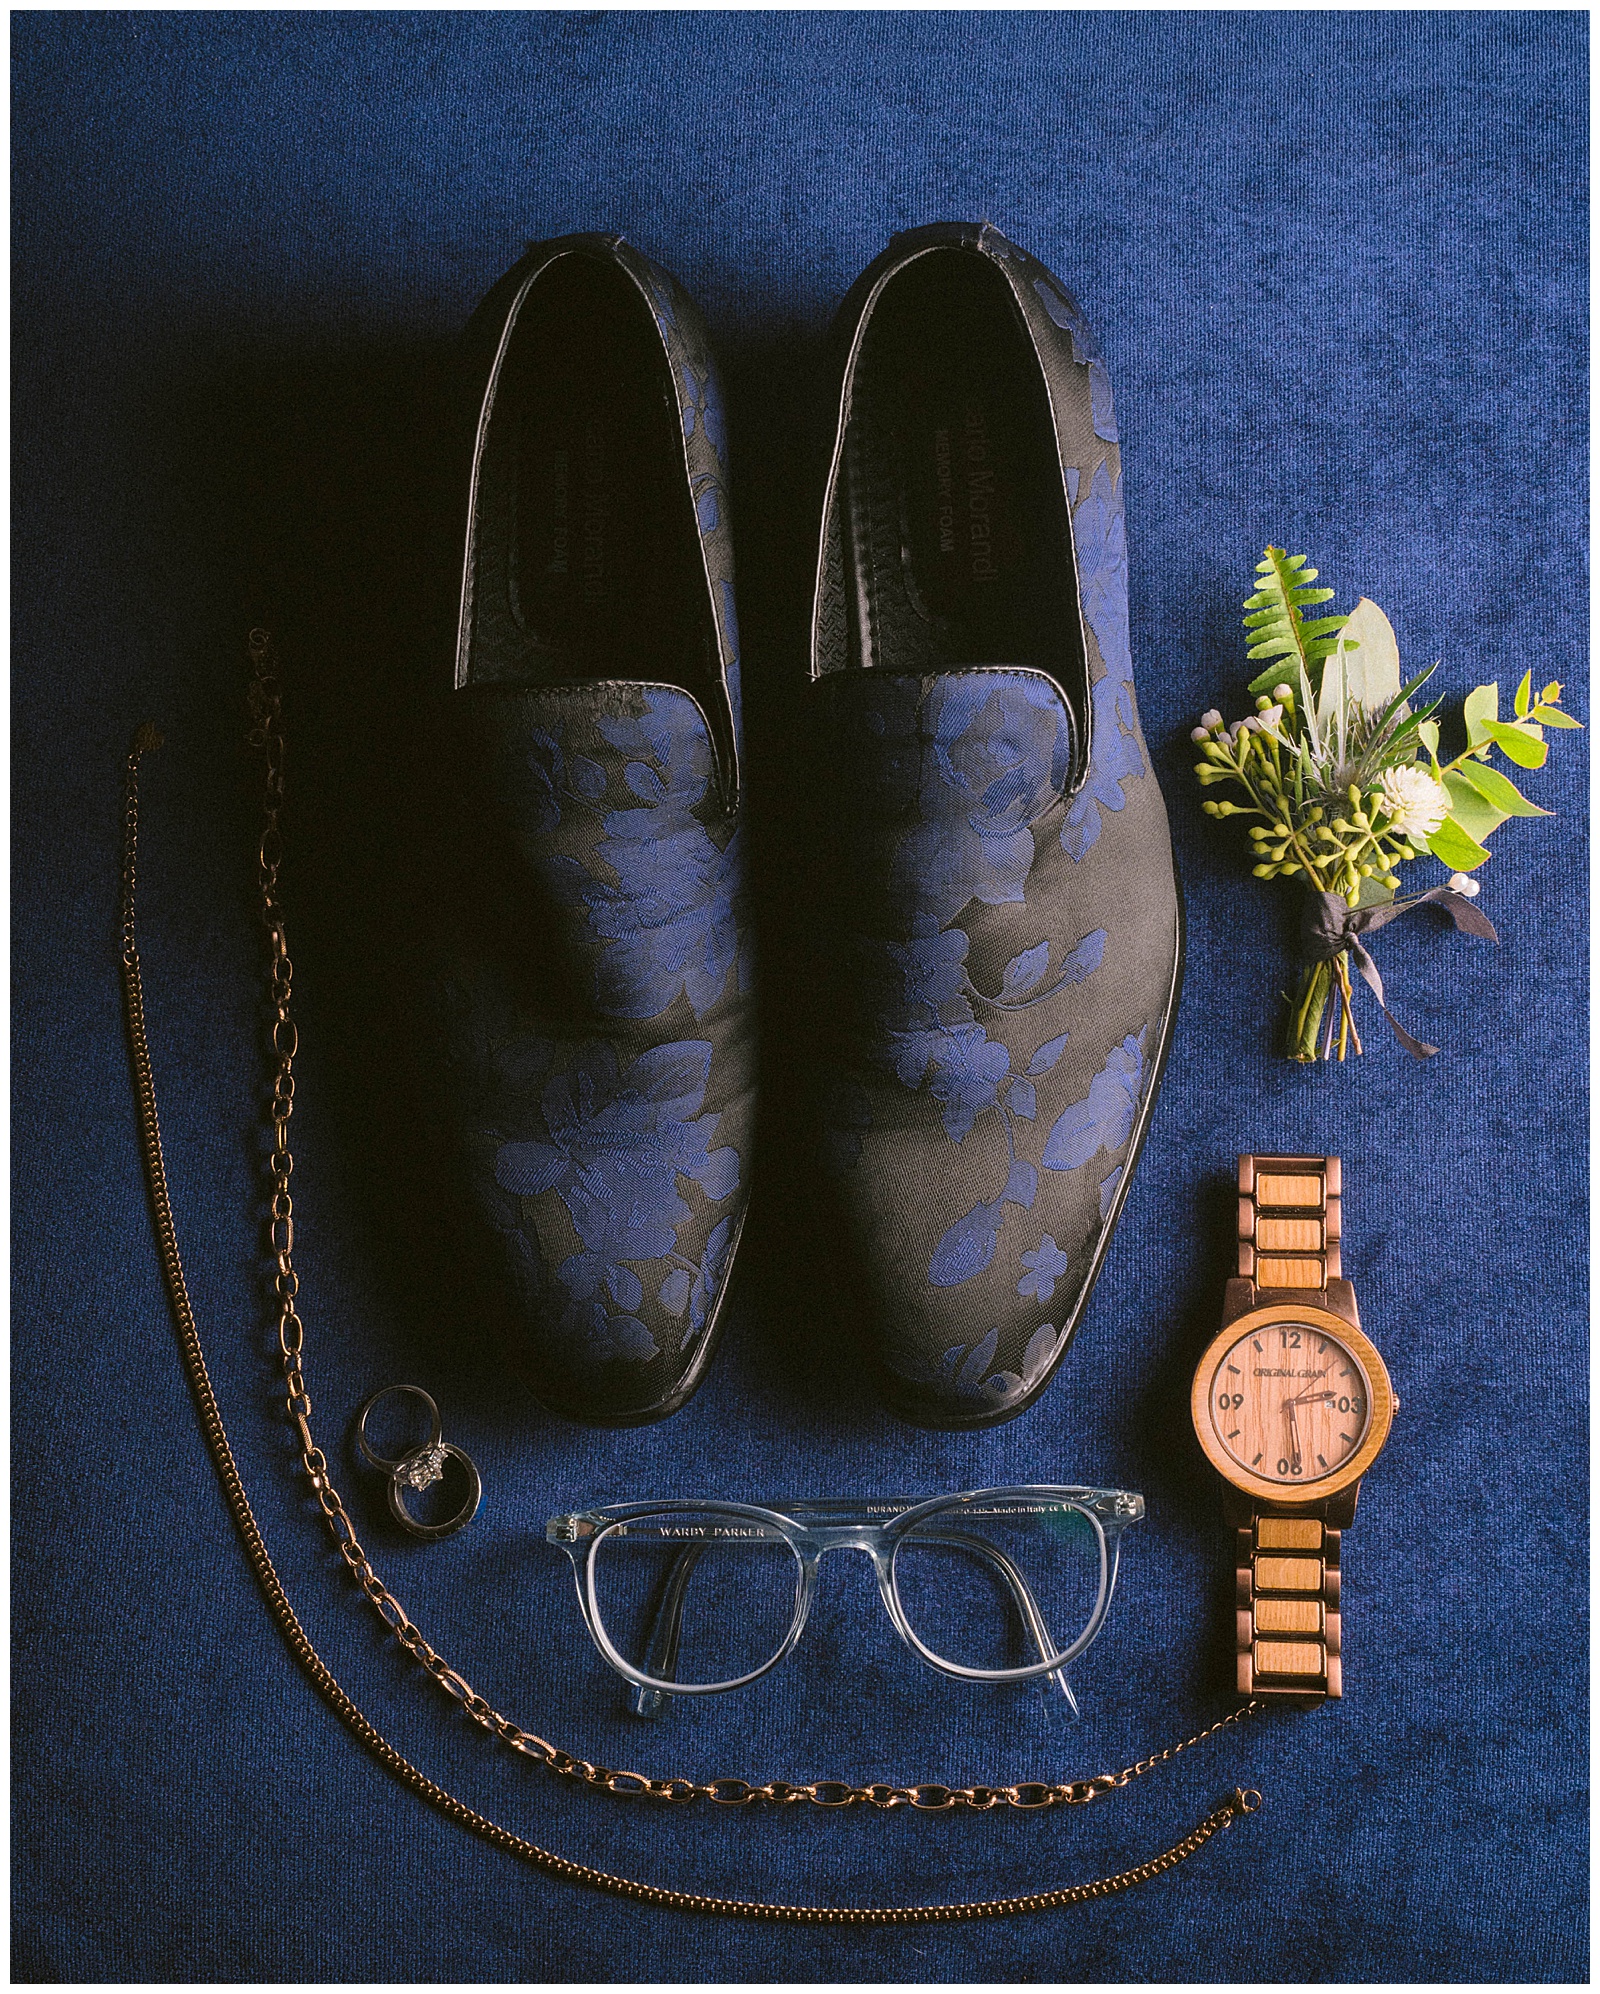 Blue shoes, glasses, and a bronze watch sit on a blue backdrop